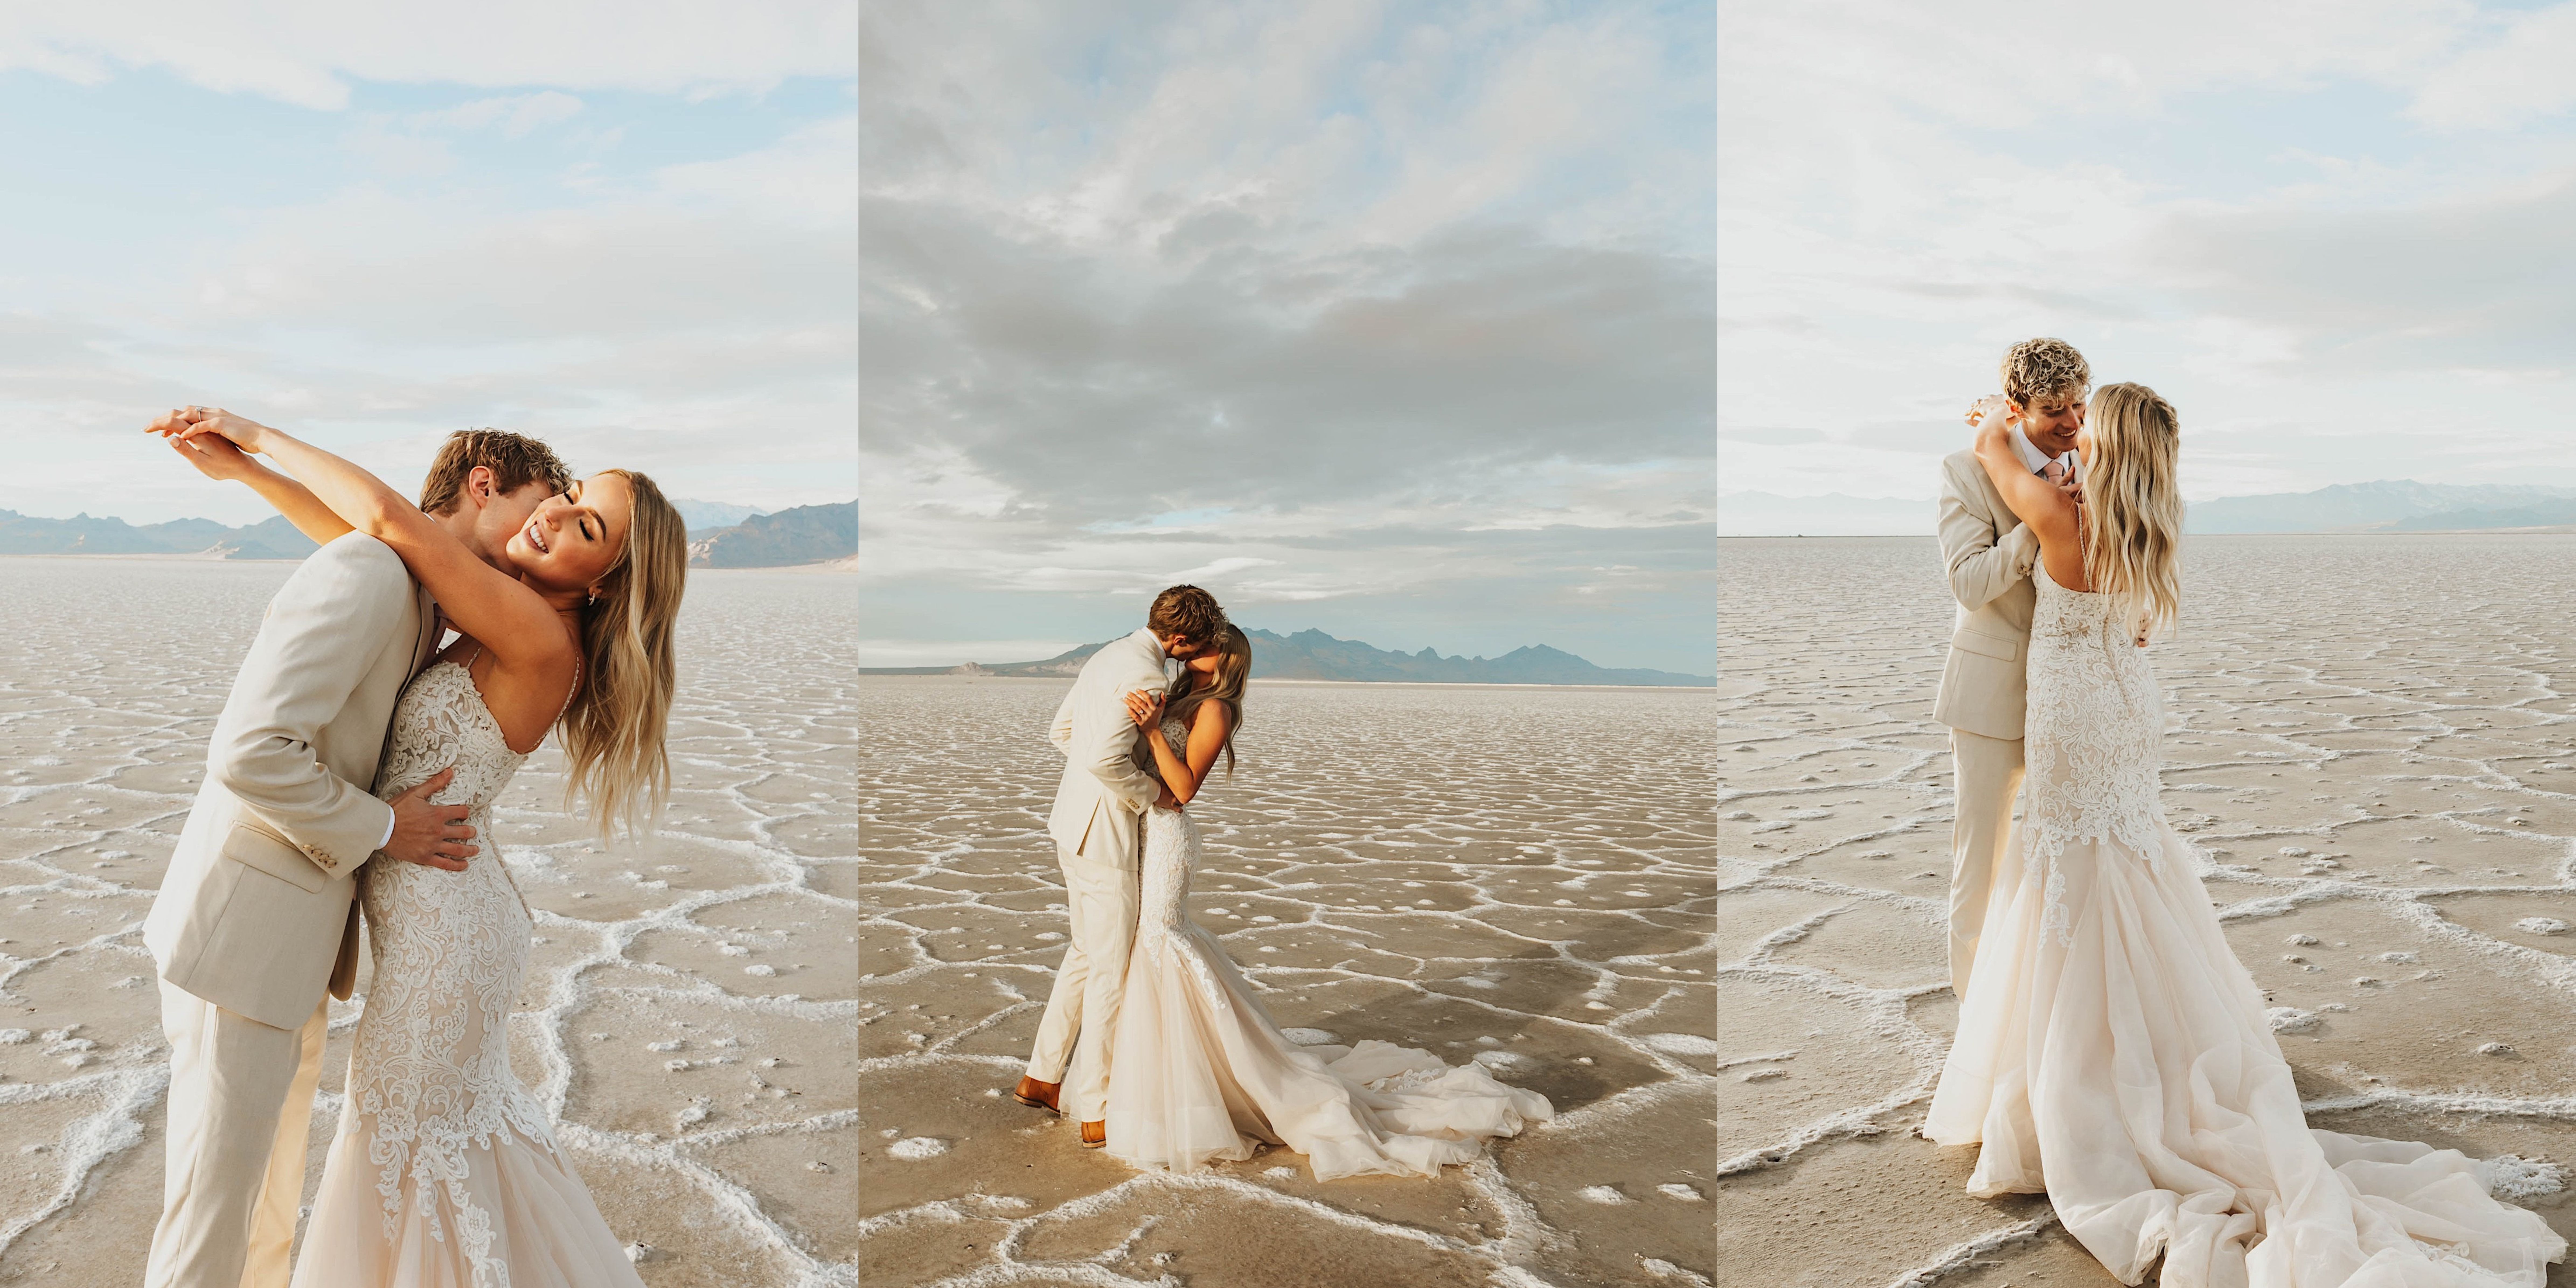 3 photos side by side of a bride and groom together in the Utah Salt Flats, the left is of the groom kissing the bride on the neck as she smiles, the middle is of them kissing one another, and the right is of the brides back as she embraces the groom and he smiles at her